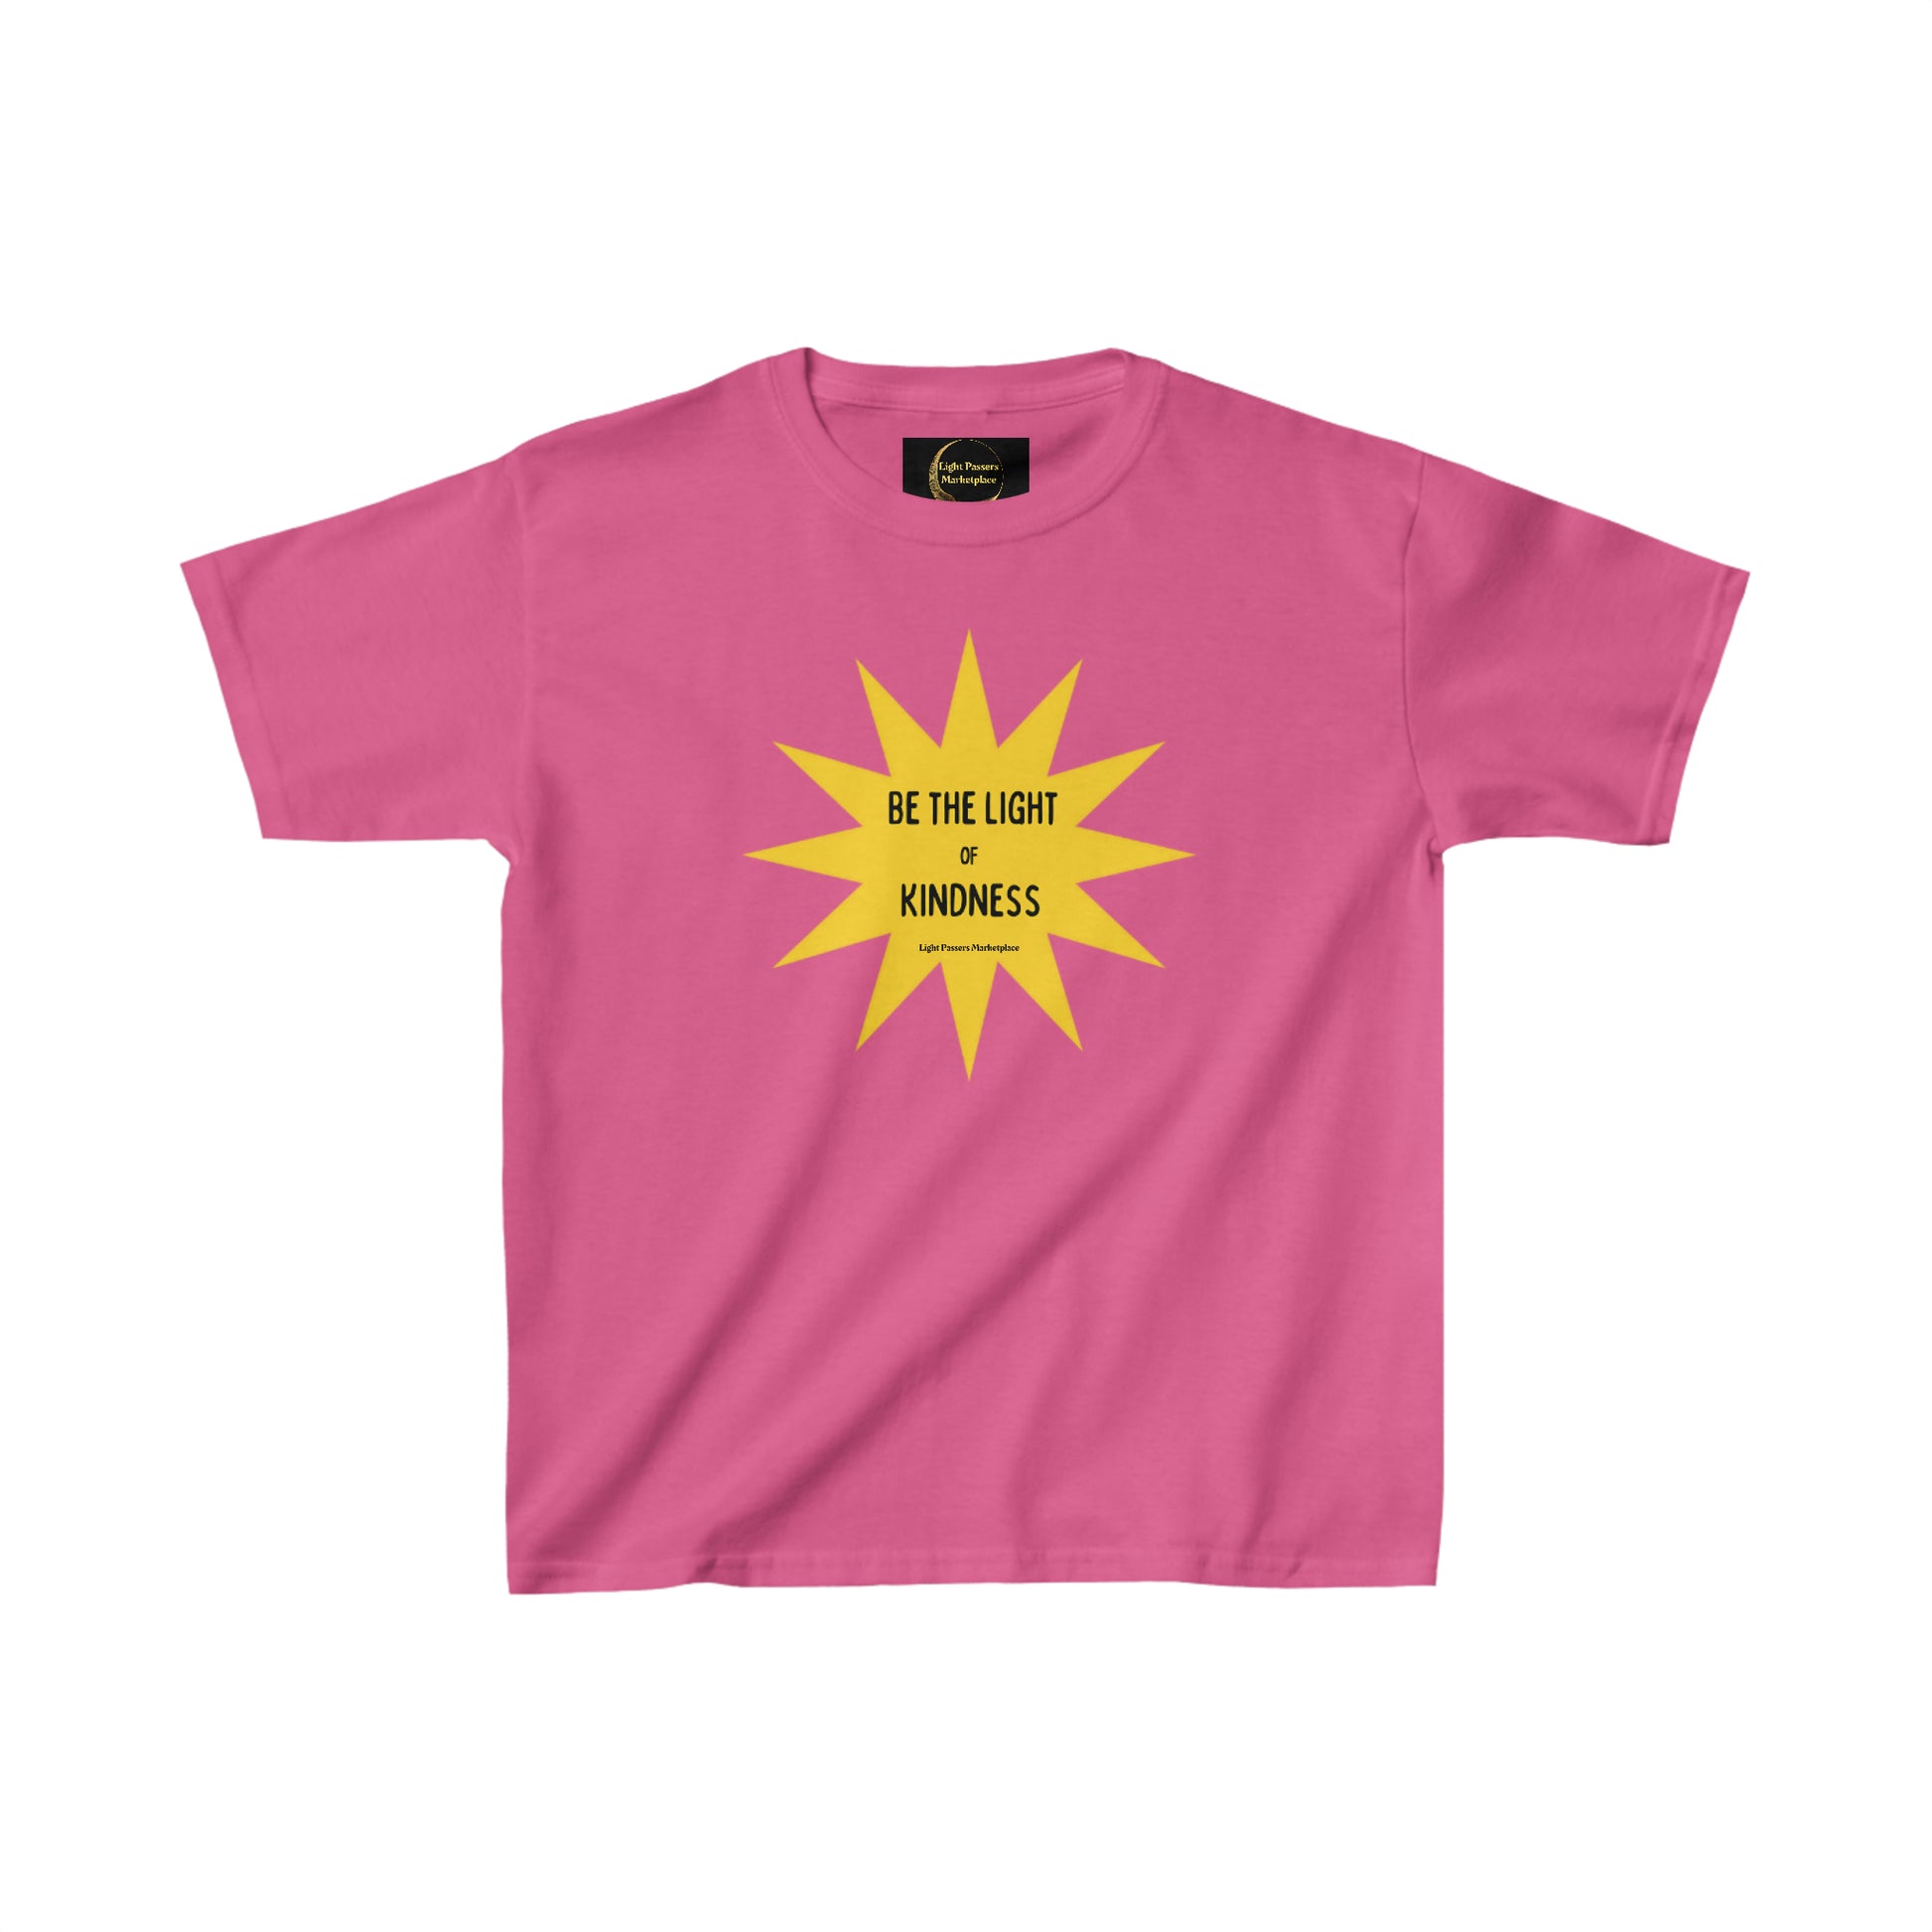 Youth cotton T-shirt featuring a yellow star design. 100% cotton fabric, tear-away label, twill tape shoulders for durability, ribbed collar for curl resistance. Midweight, classic fit, seamless sides.